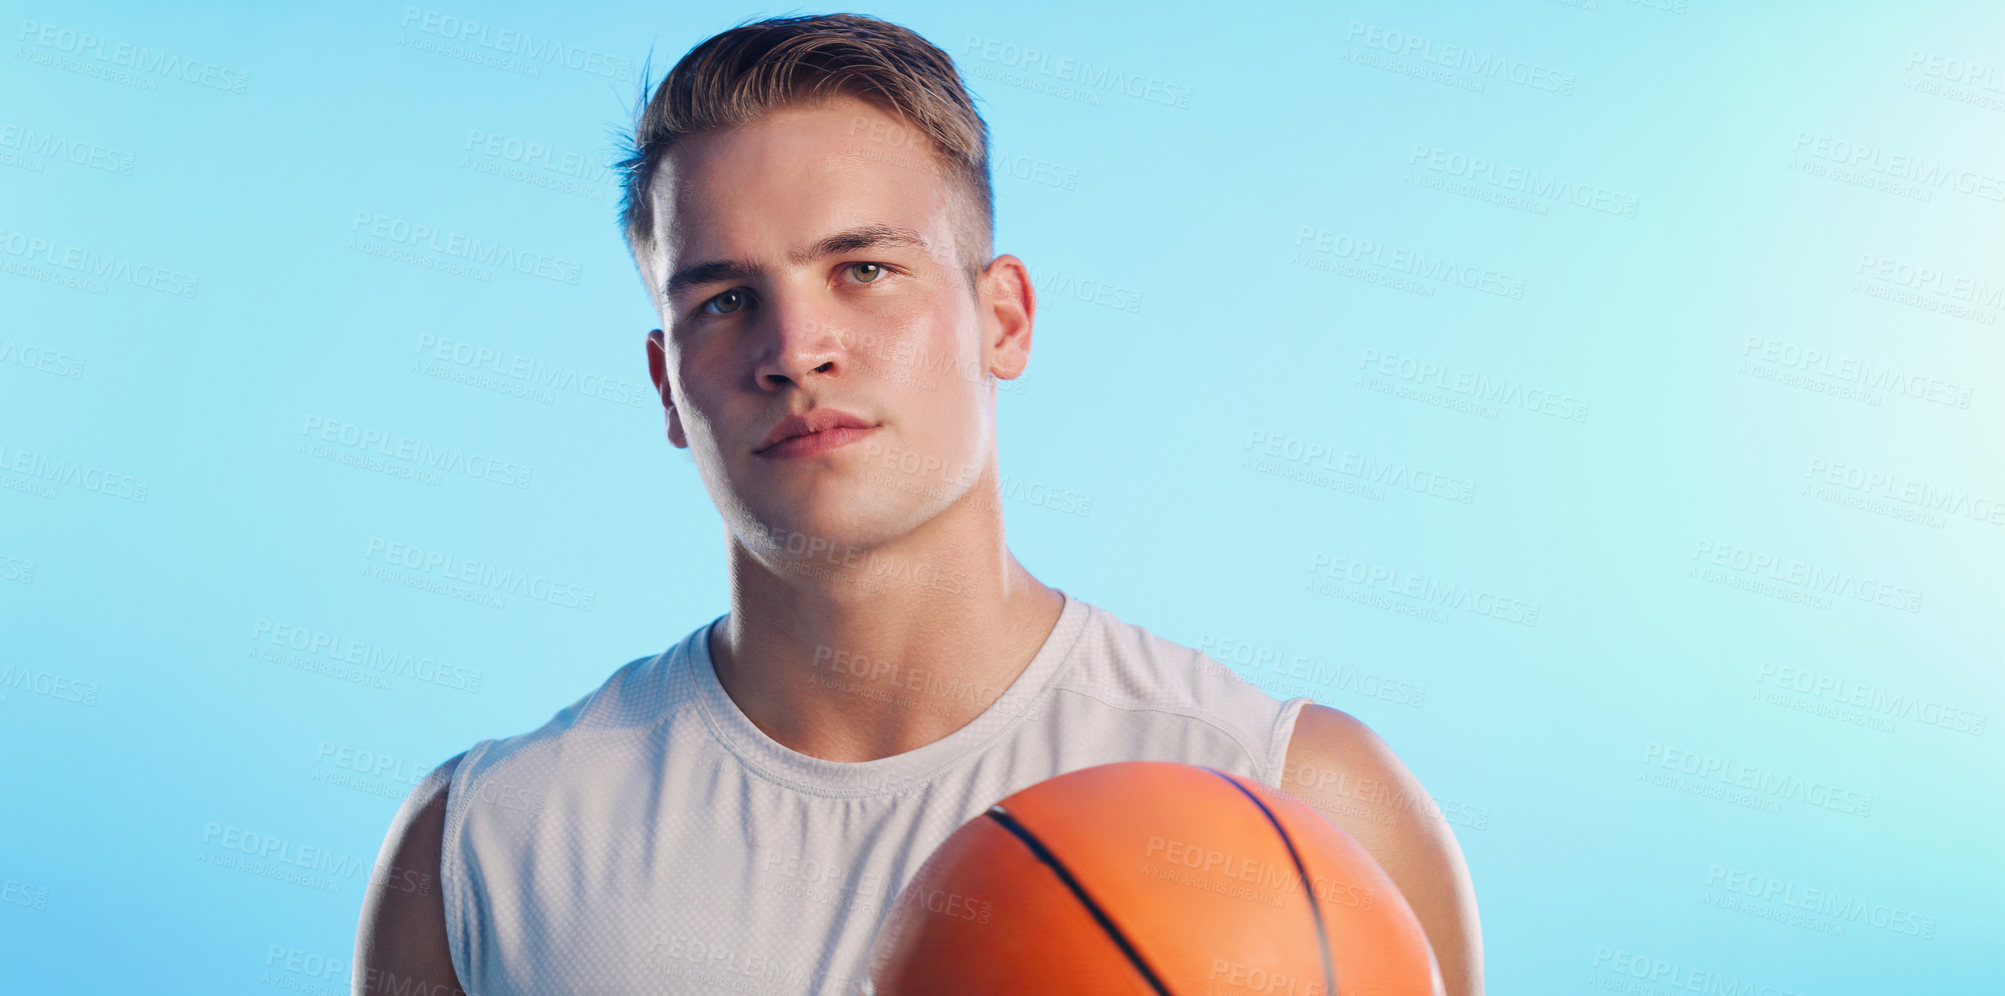 Buy stock photo Studio portrait of a handsome young male basketball player posing with a ball against a blue background